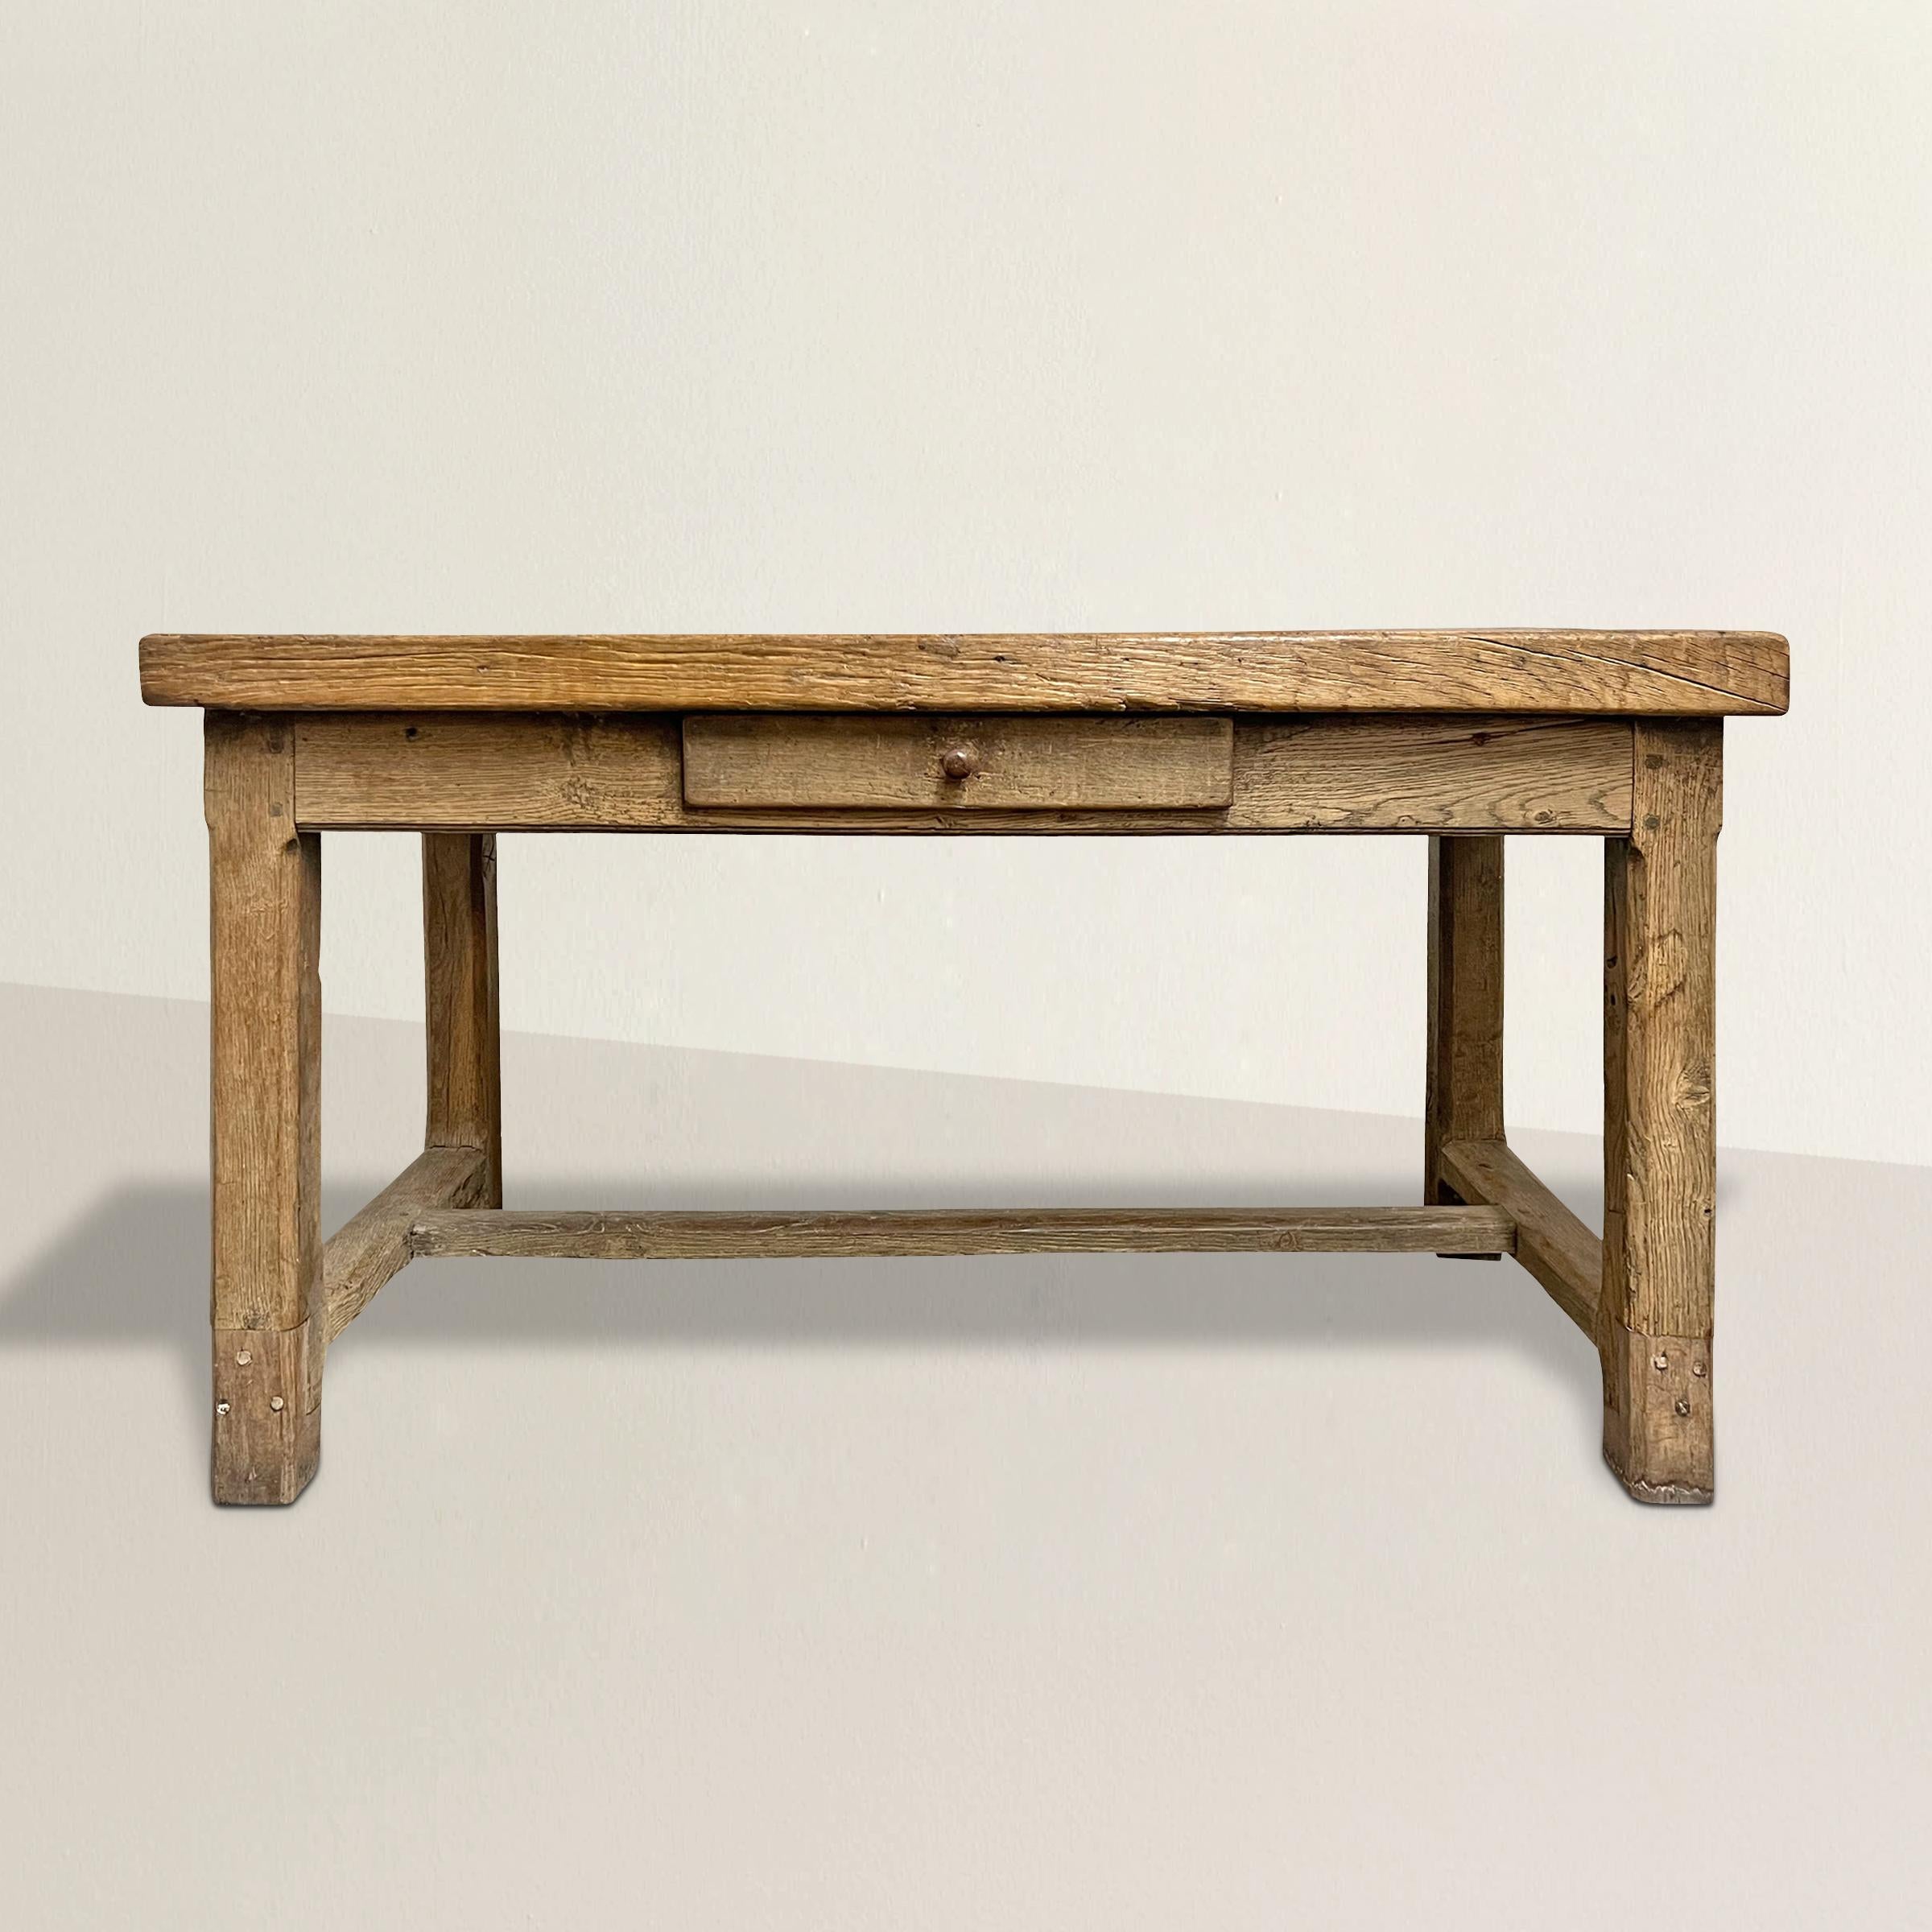 An incredible 18th century French Provincial oak work table from Normandy with a 2.5 inch thick top supported by chamfered square legs, a well-worn stretcher, a single drawer on one side, and the most beautiful finish we've seen in a long time. The